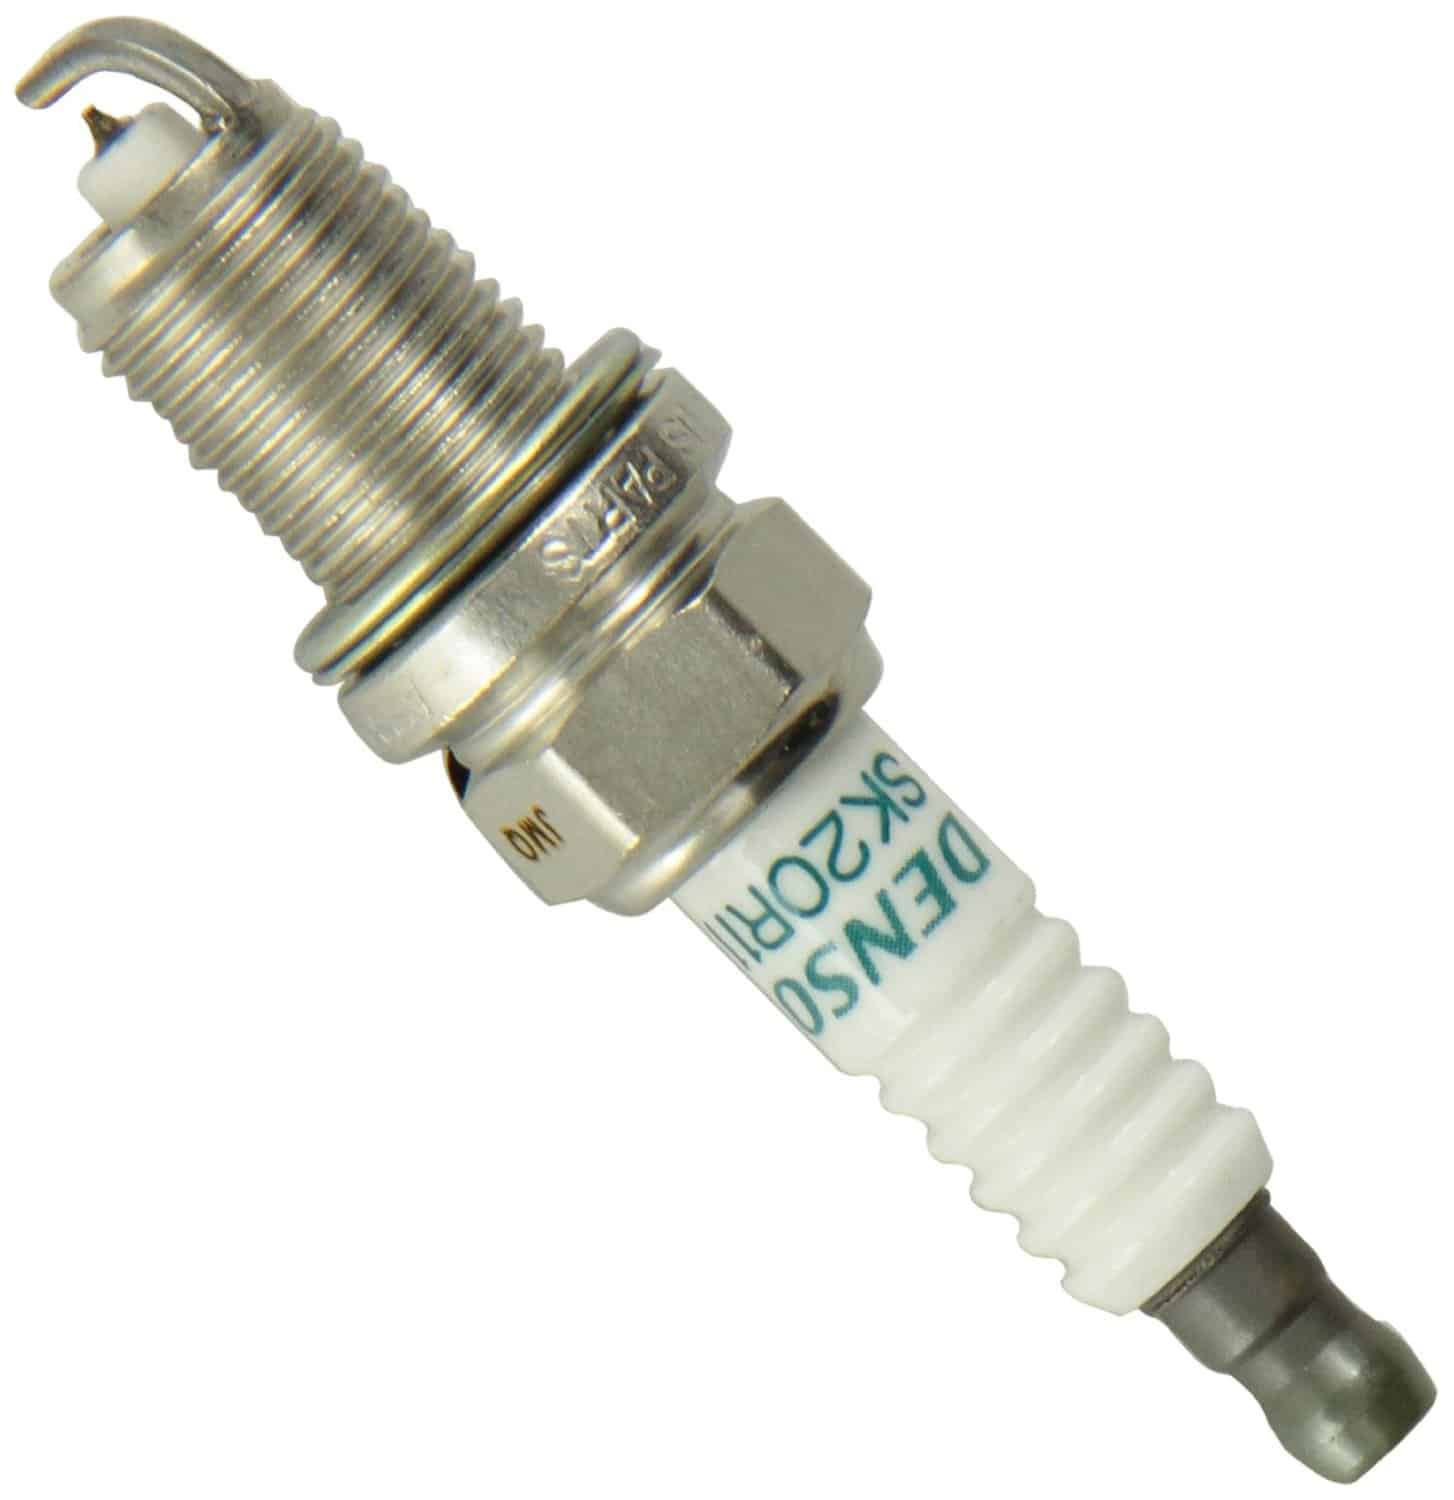 The Best Spark Plugs (Review and Buying Guide) in 2020